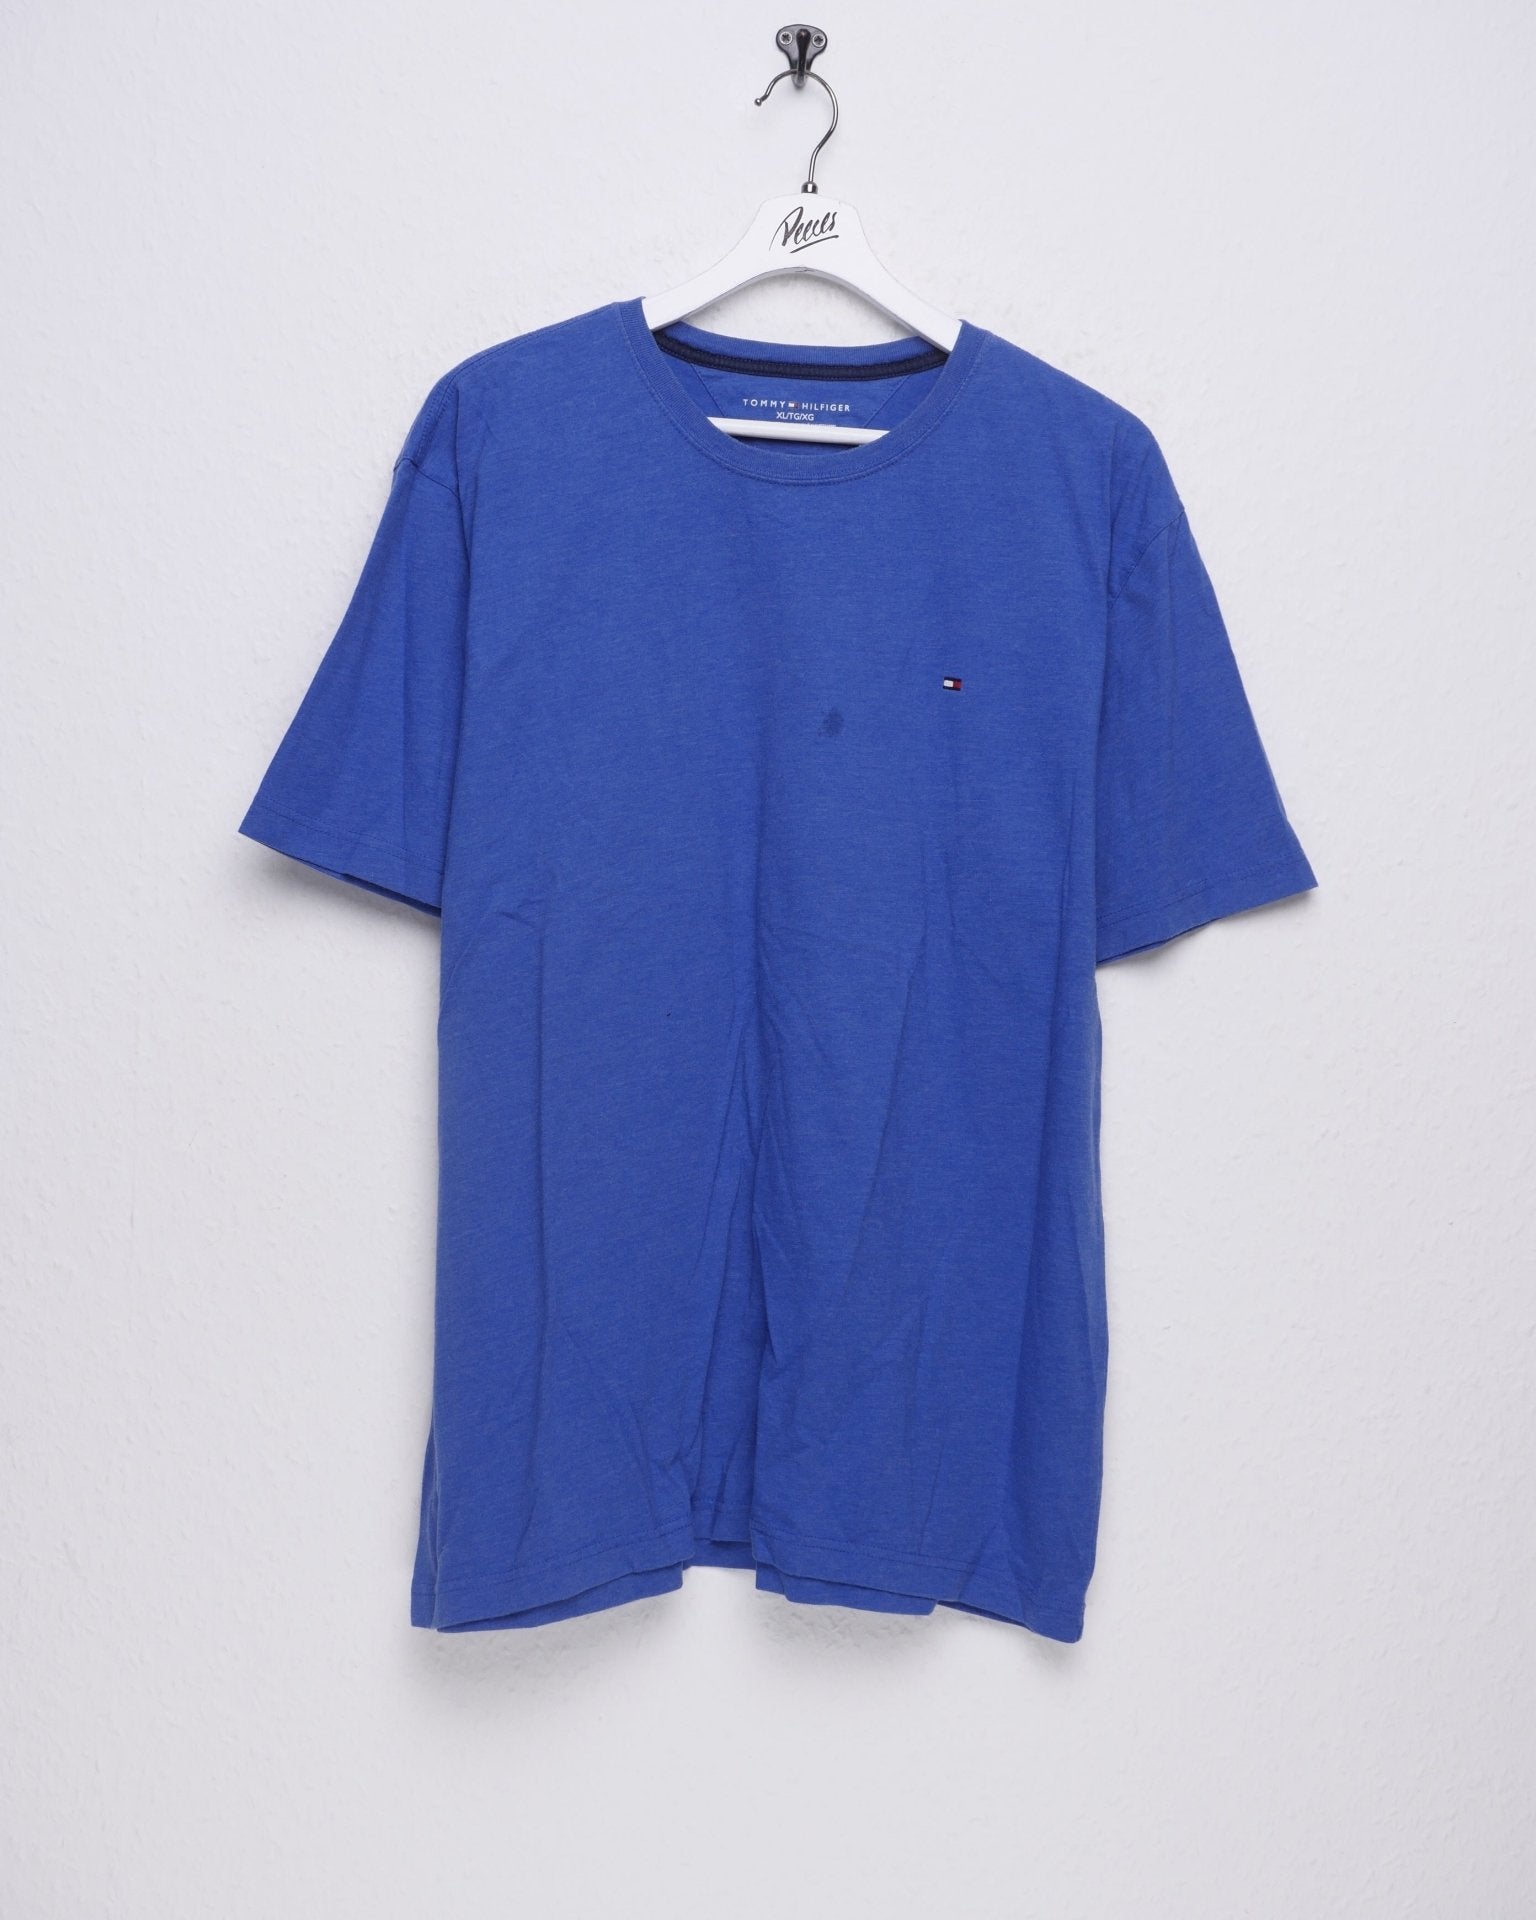 Tommy Hilfiger small embroidered Logo blue Shirt - Peeces